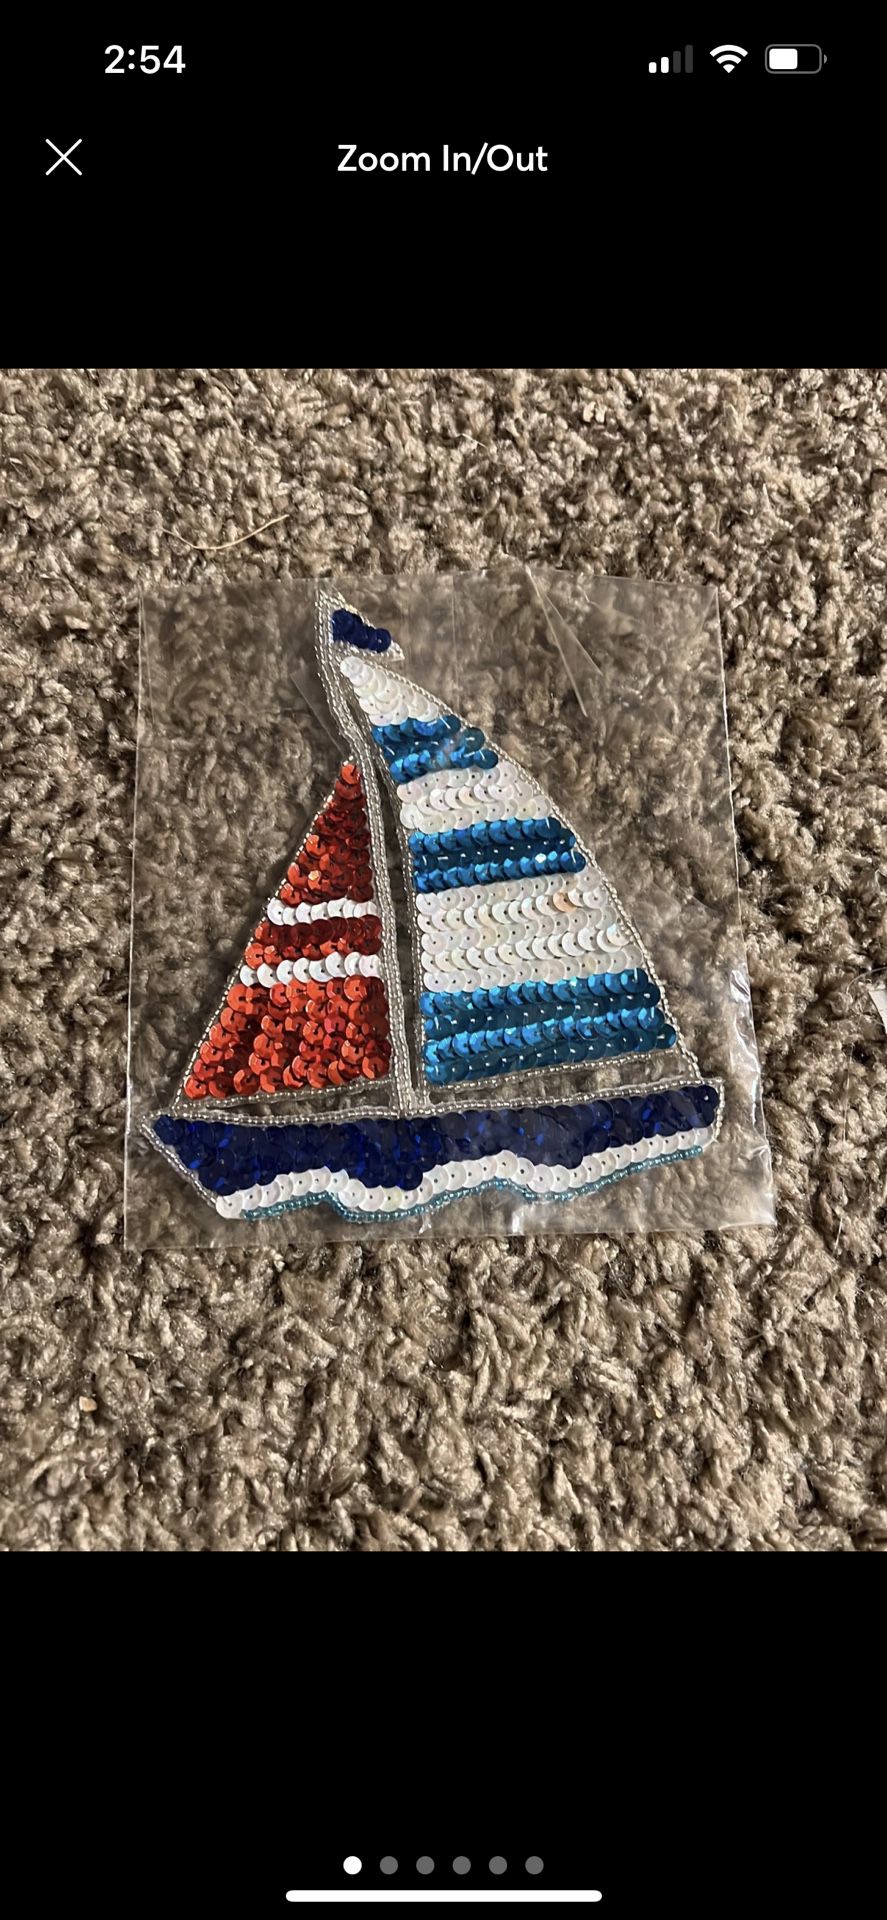 Sequin boat patch